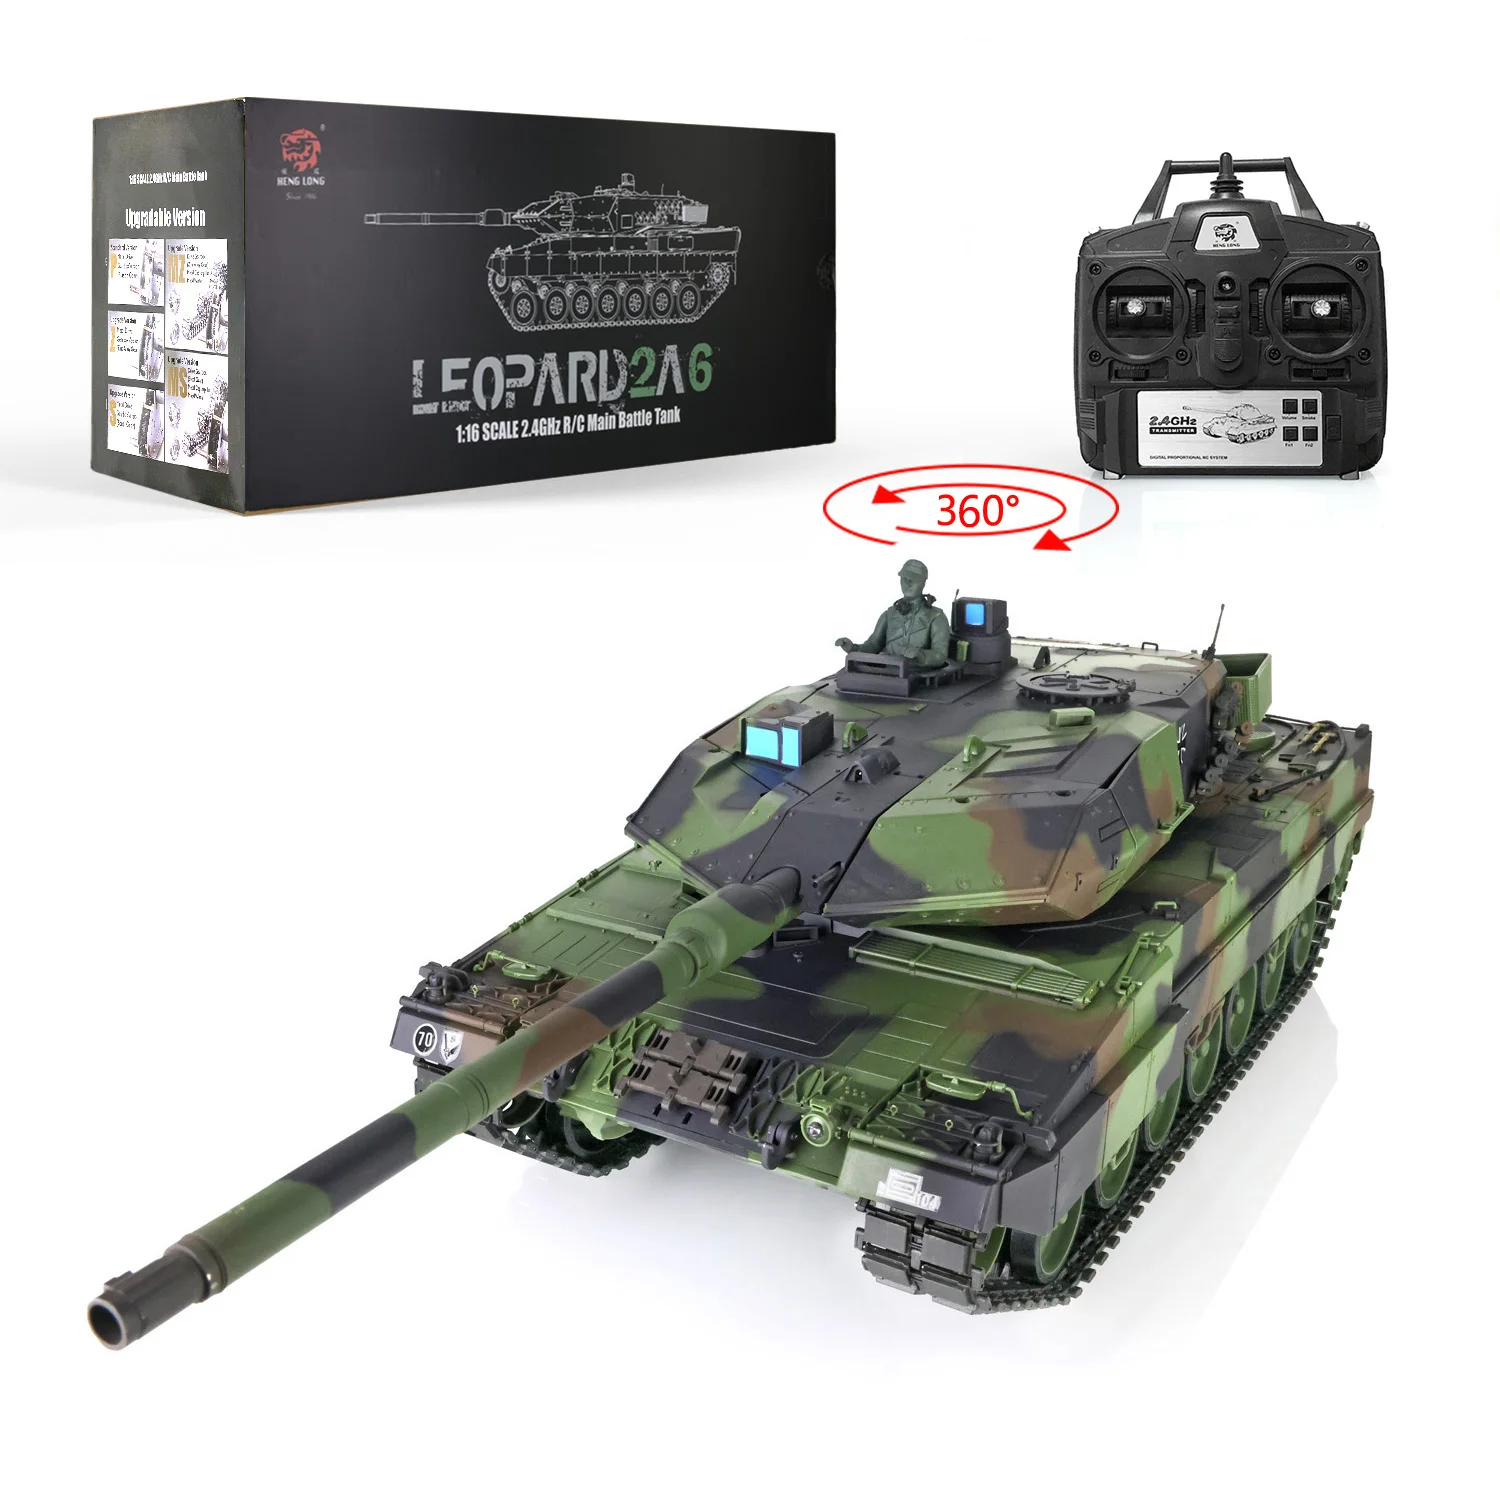 

2.4Ghz HENG LONG 1/16 7.0 Plastic Leopard2A6 RC Tank 3889 W/ 360 Rotation Turret BB Shoot Unit Track Gearbox Toys TH17575-SMT7